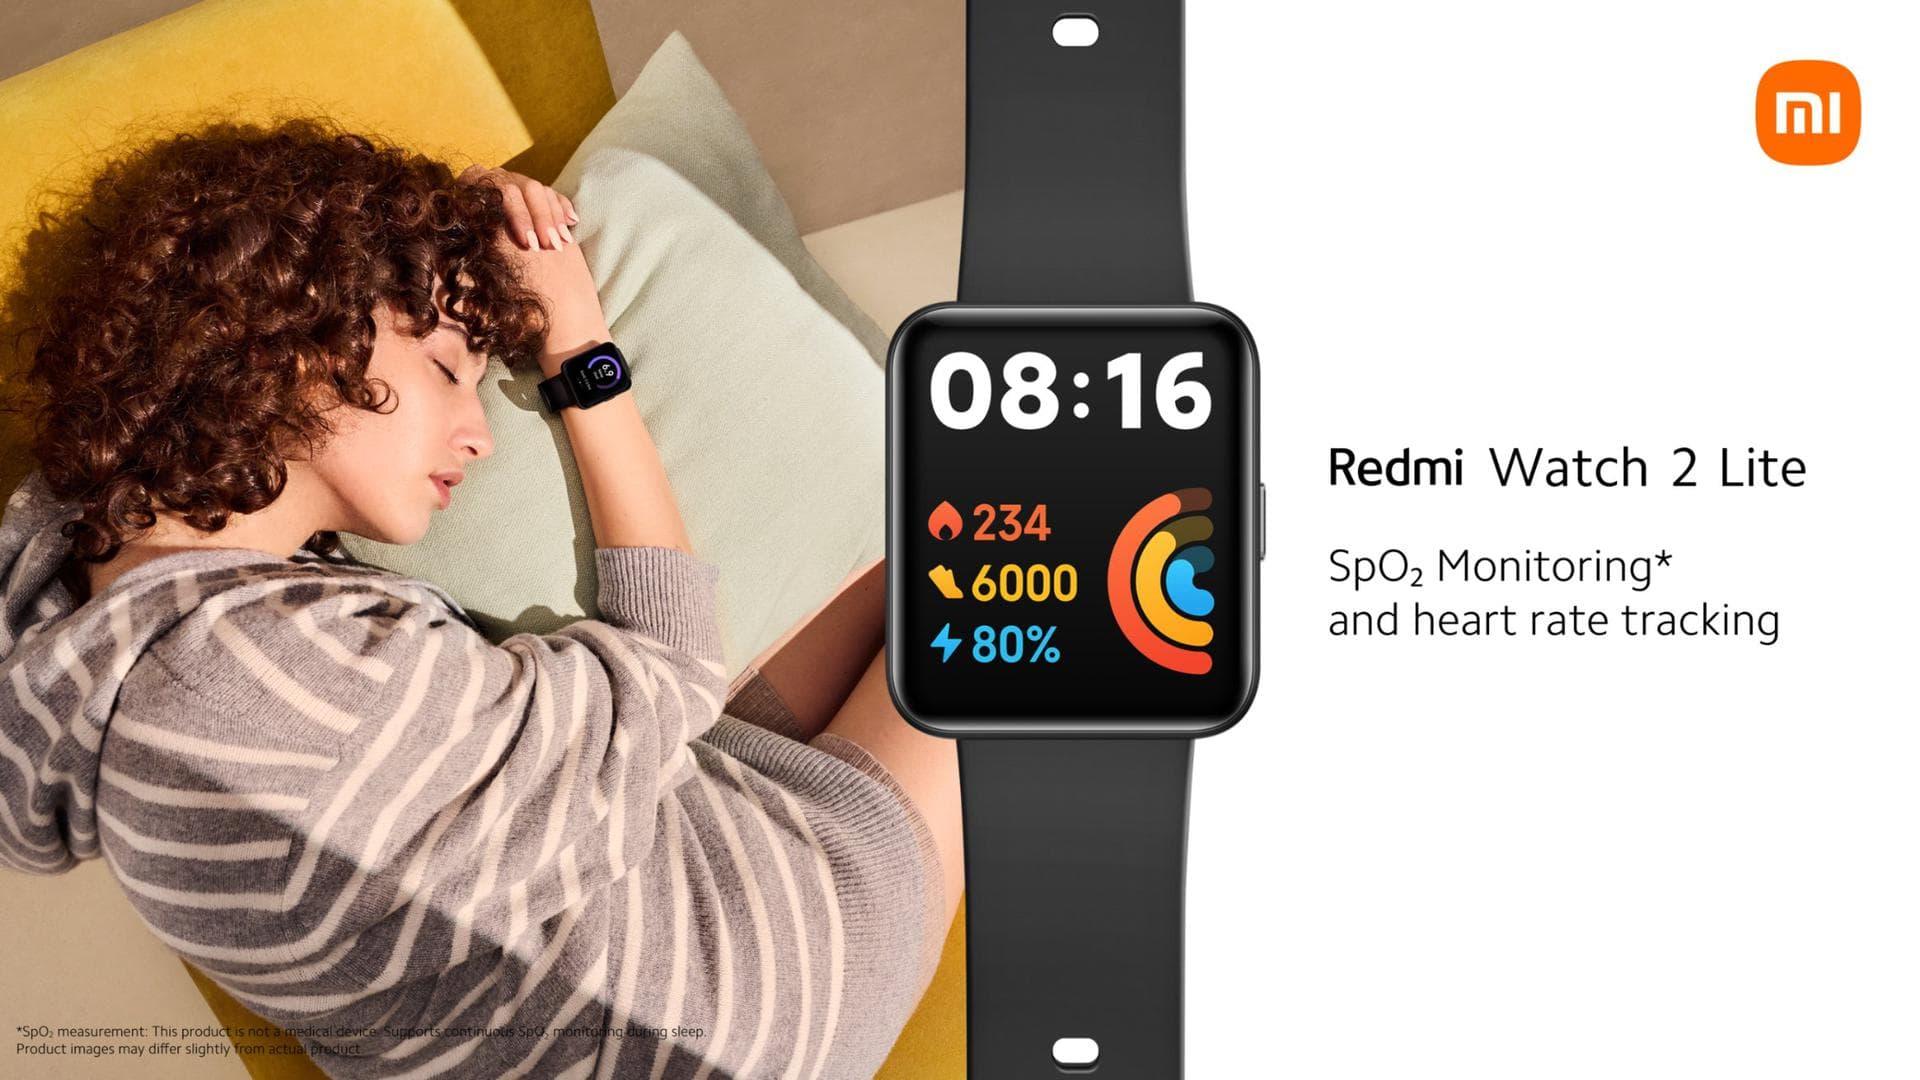  Xiaomi Redmi Watch 2 Lite, 1.55 Colorful Touch Display, 100+  Fitness Modes, 5 ATM Water Resistance, SPO2 Measurement, 24-Hour Heart Rate  Tracking, Multi-System Standalone GPS, Black : Electronics